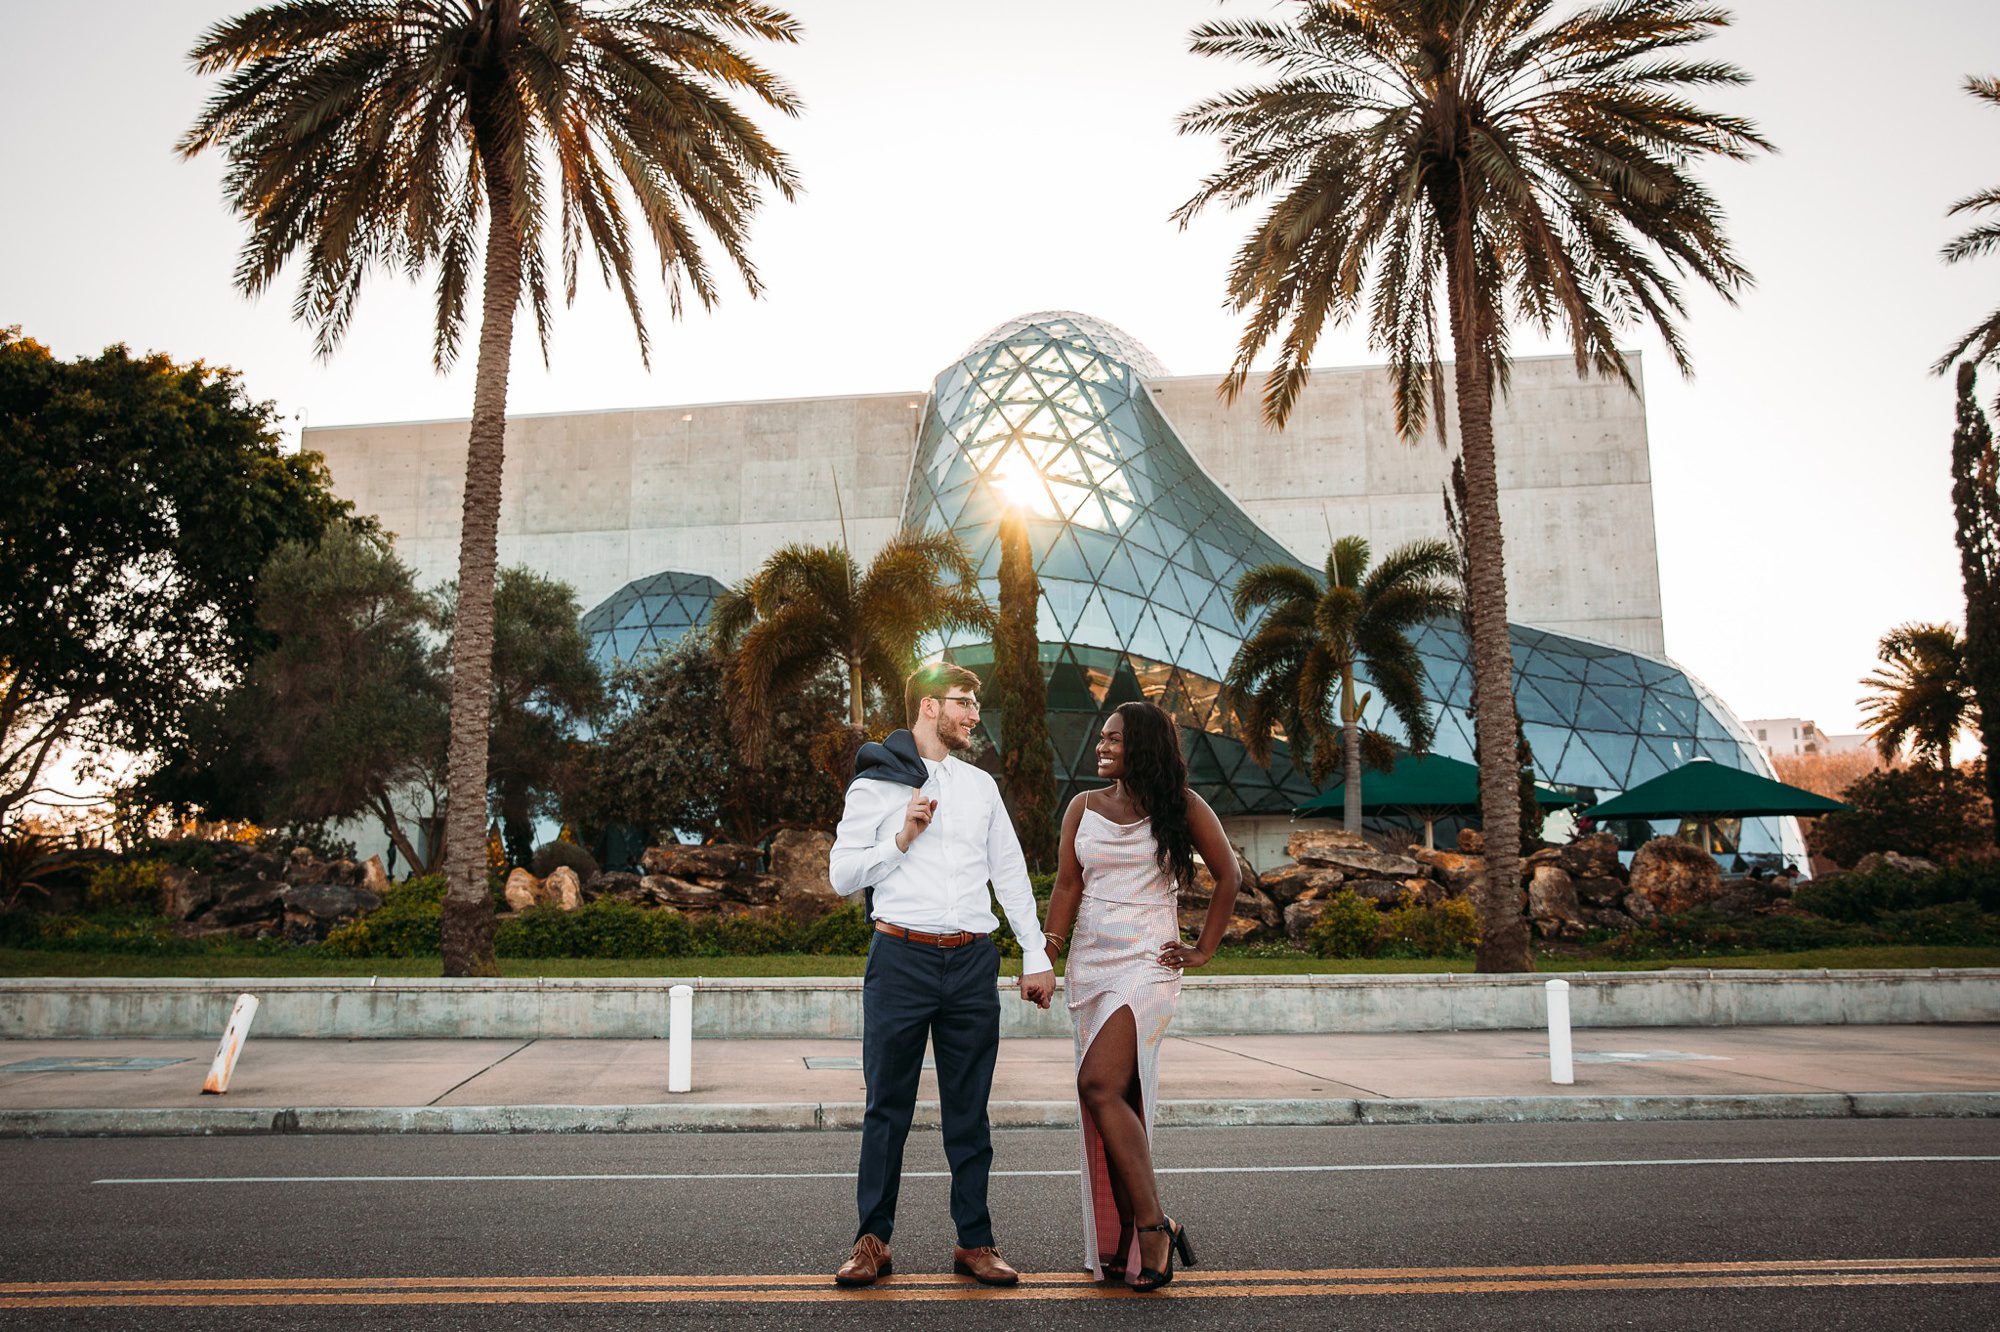 The Dali museum engagement session